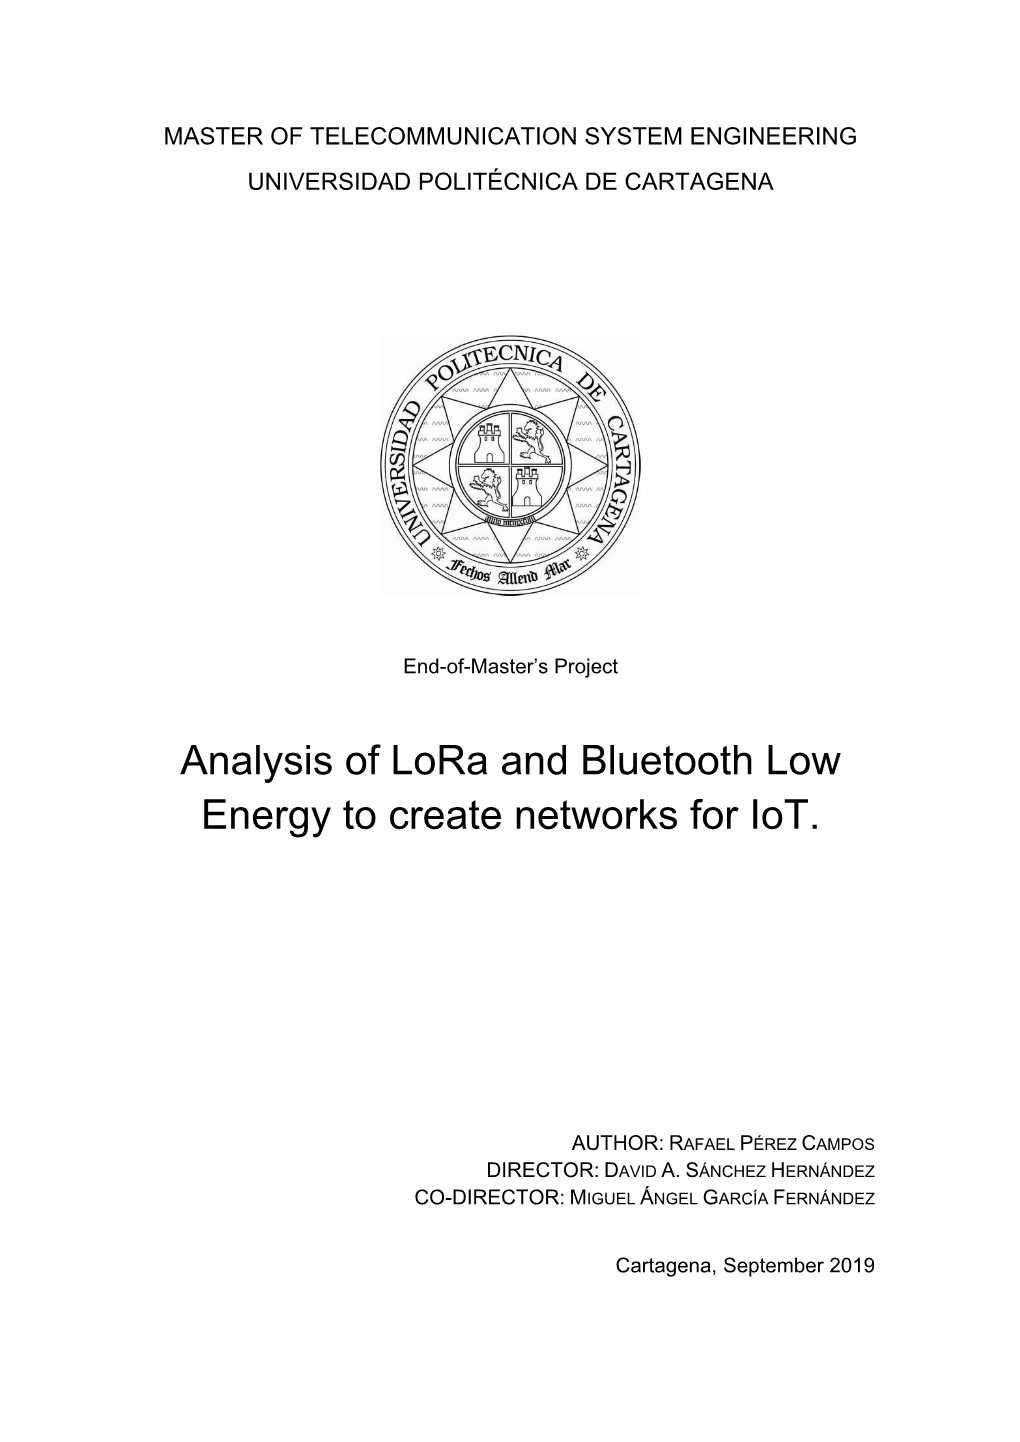 Analysis of Lora and Bluetooth Low Energy to Create Networks for Iot